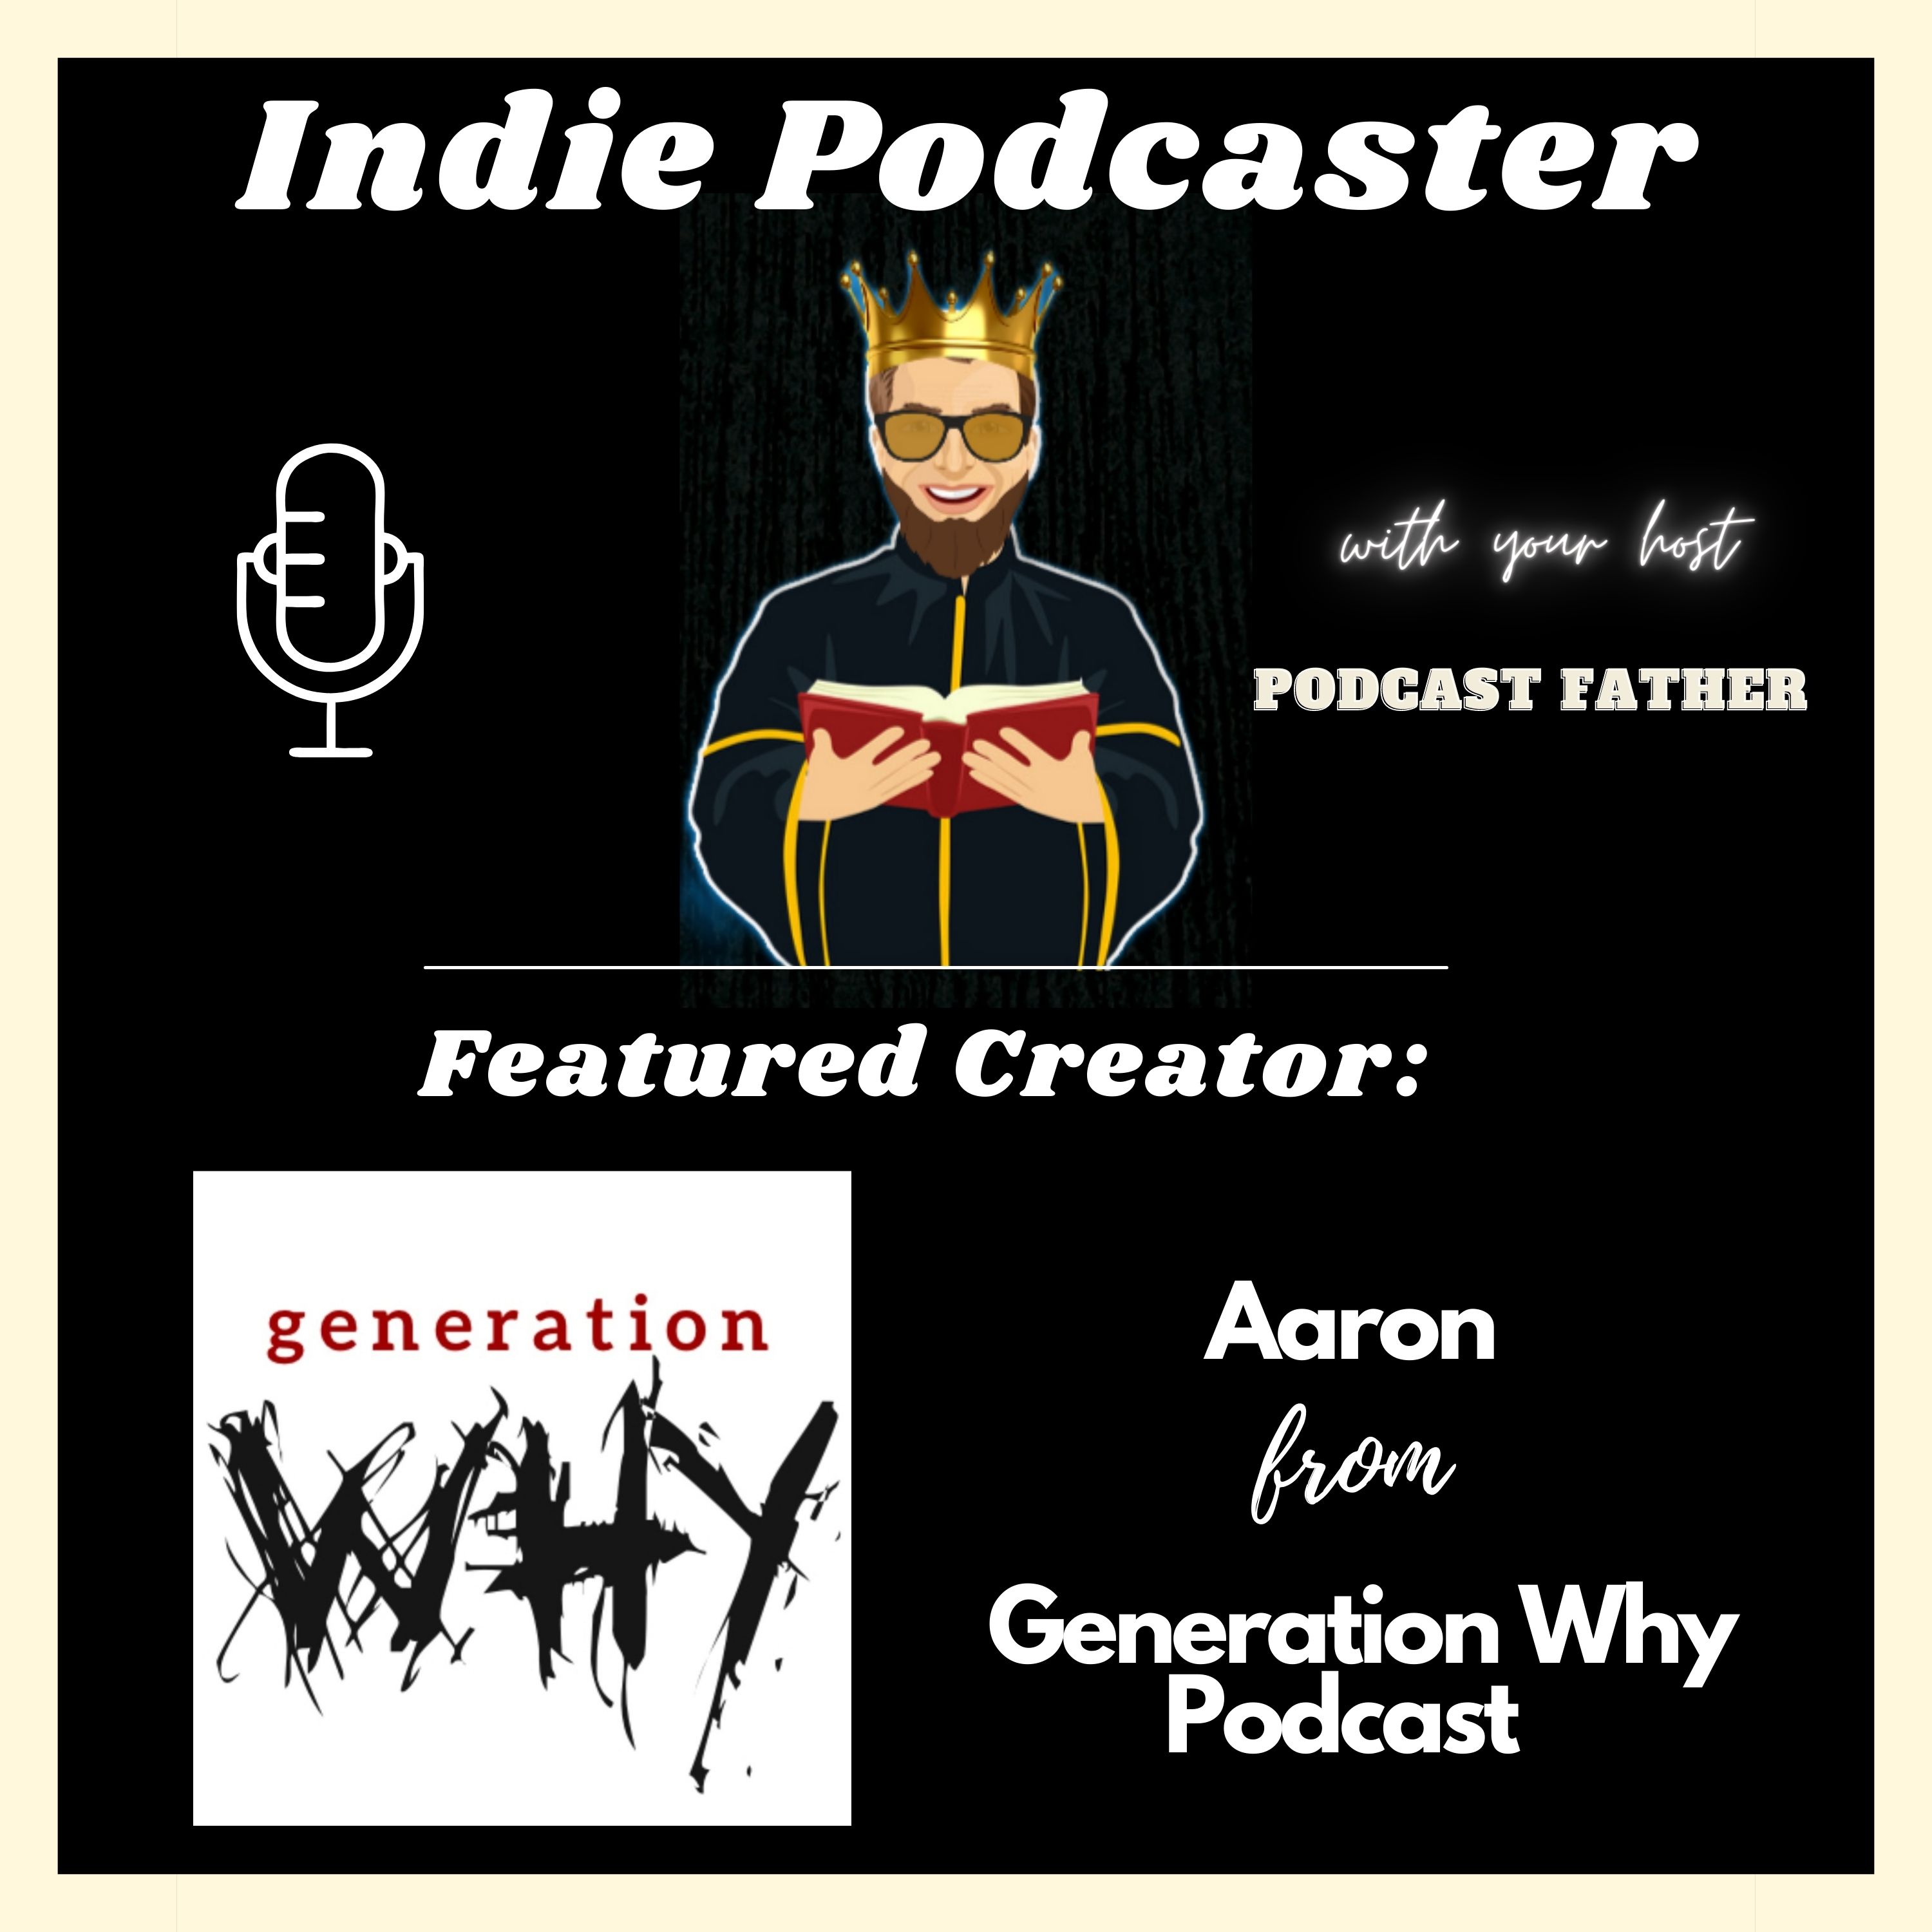 Aaron from Generation Why Podcast Image